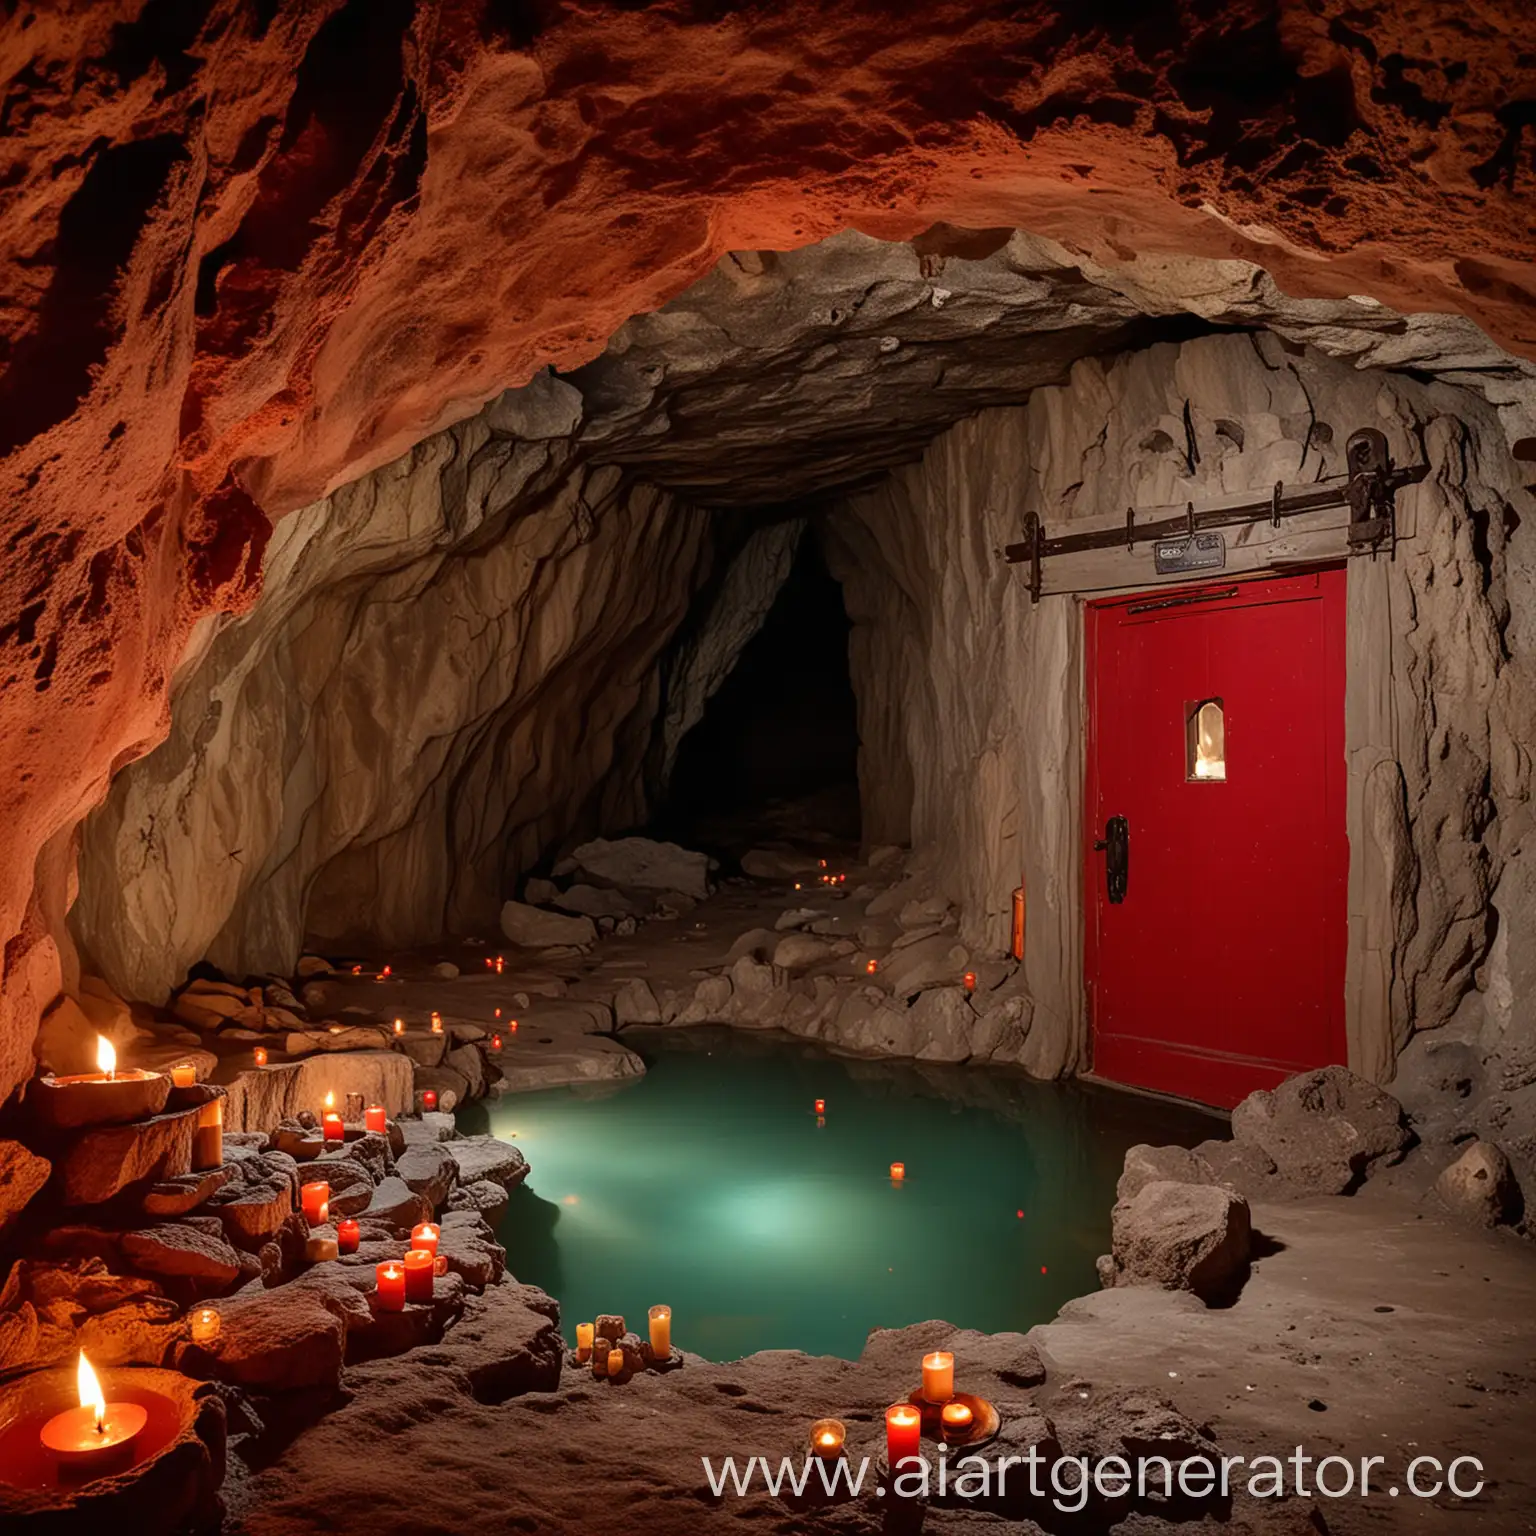 Mystical-Cave-Interior-with-Red-Door-and-Hot-Spring